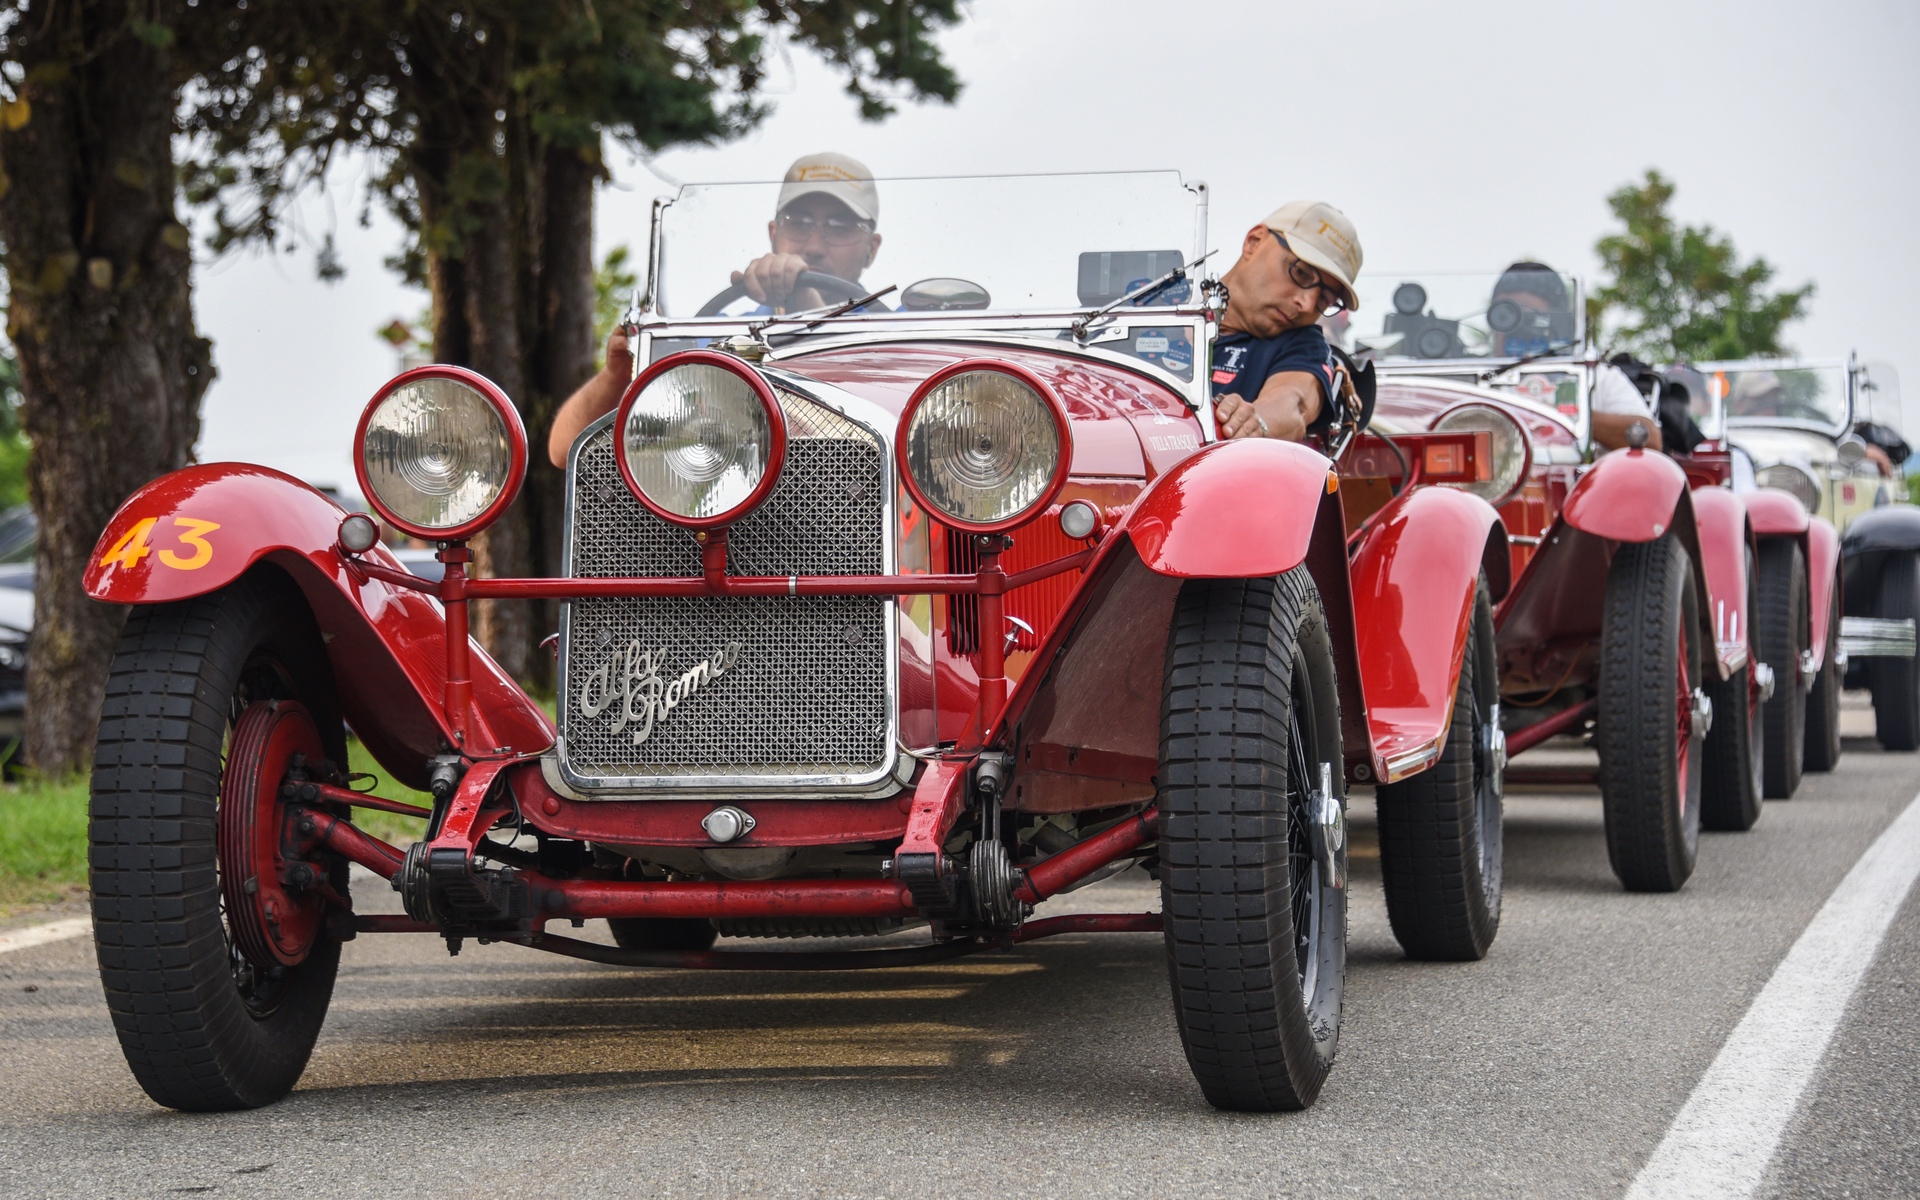 Line of red cars on road during 2021 Mille Miglia